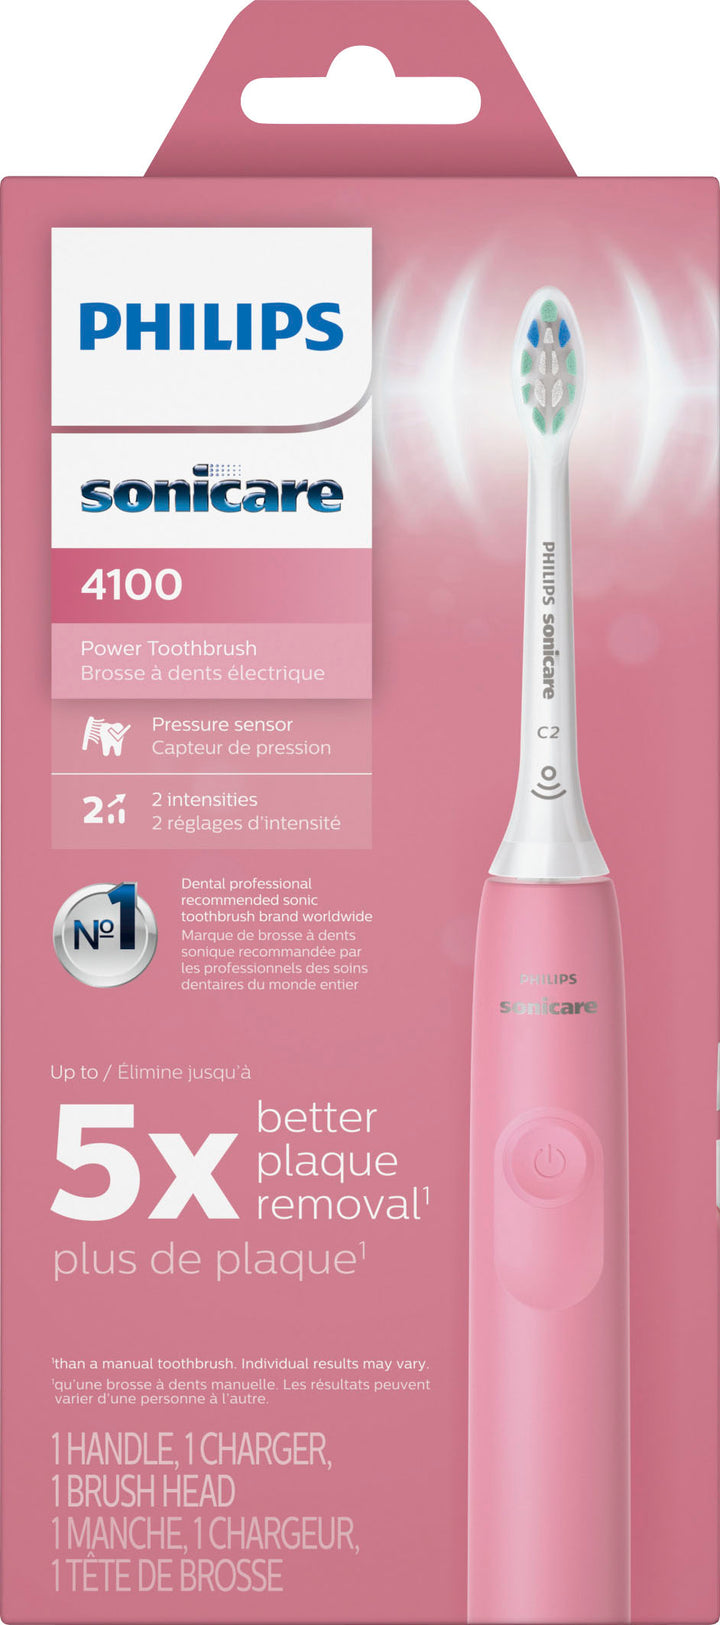 Philips Sonicare 4100 Power Toothbrush - Deep Pink_10